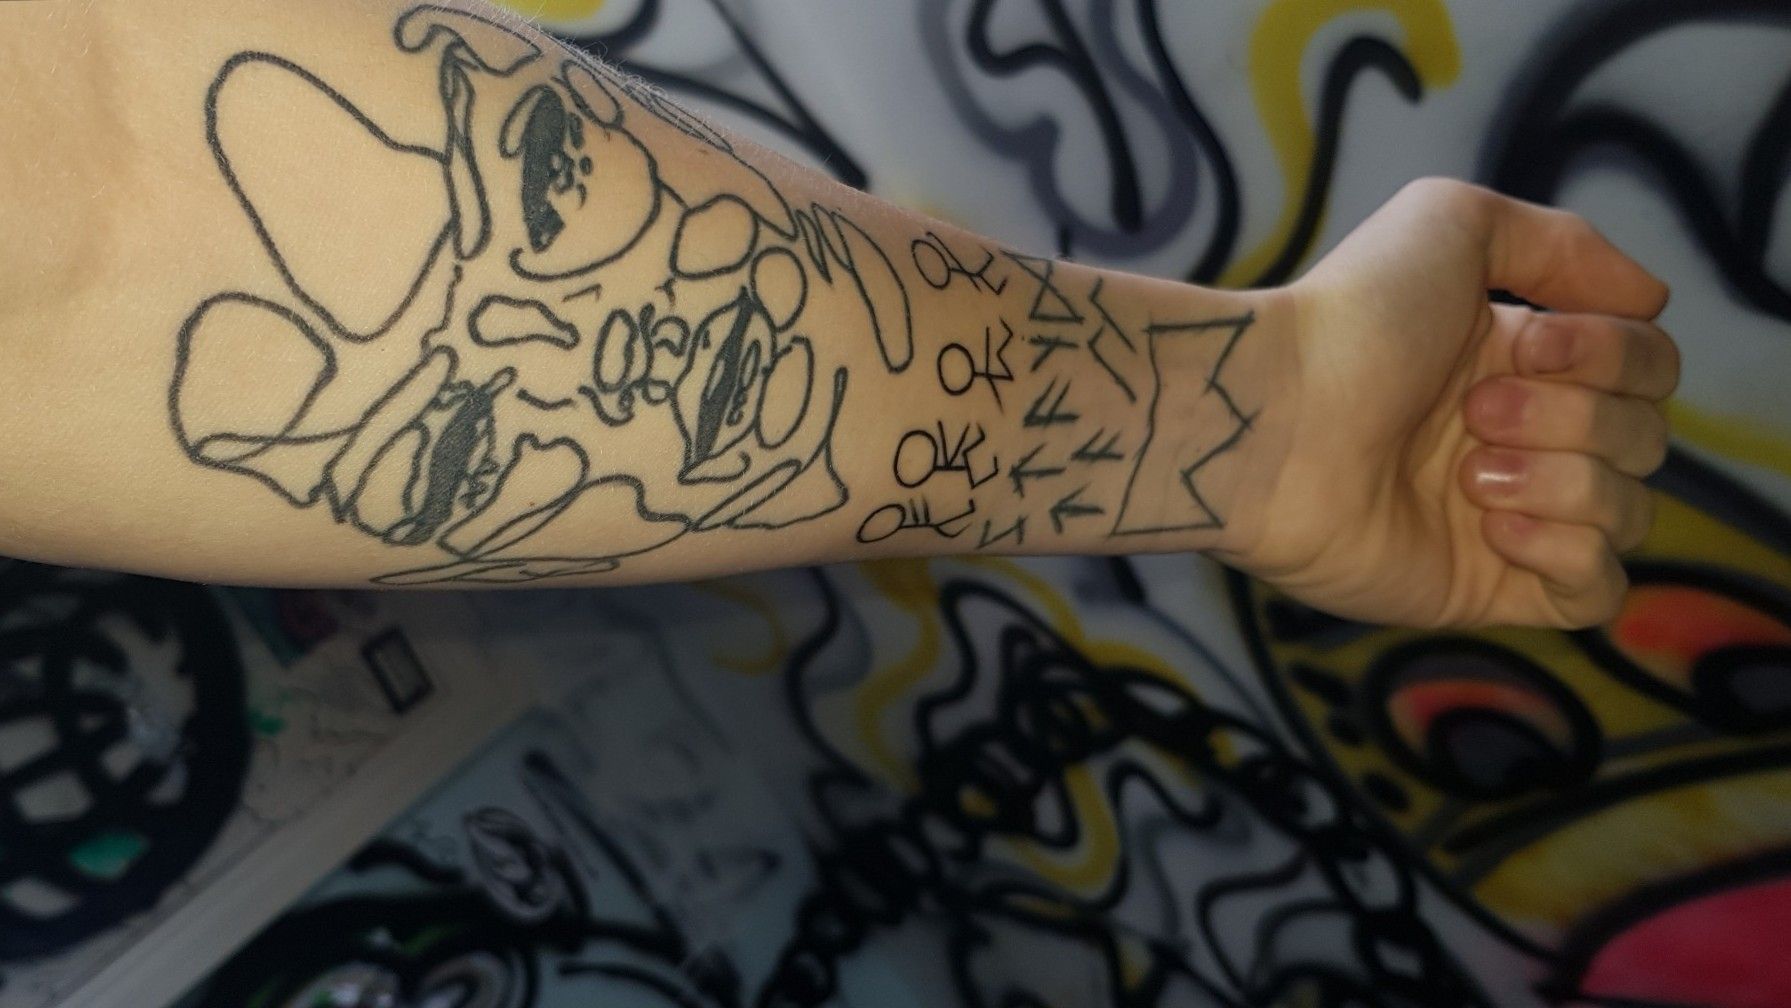 Tattoo uploaded by Luke Ridsdill Smith  A tribe called quest  basquiat  crown  nordic  Tattoodo